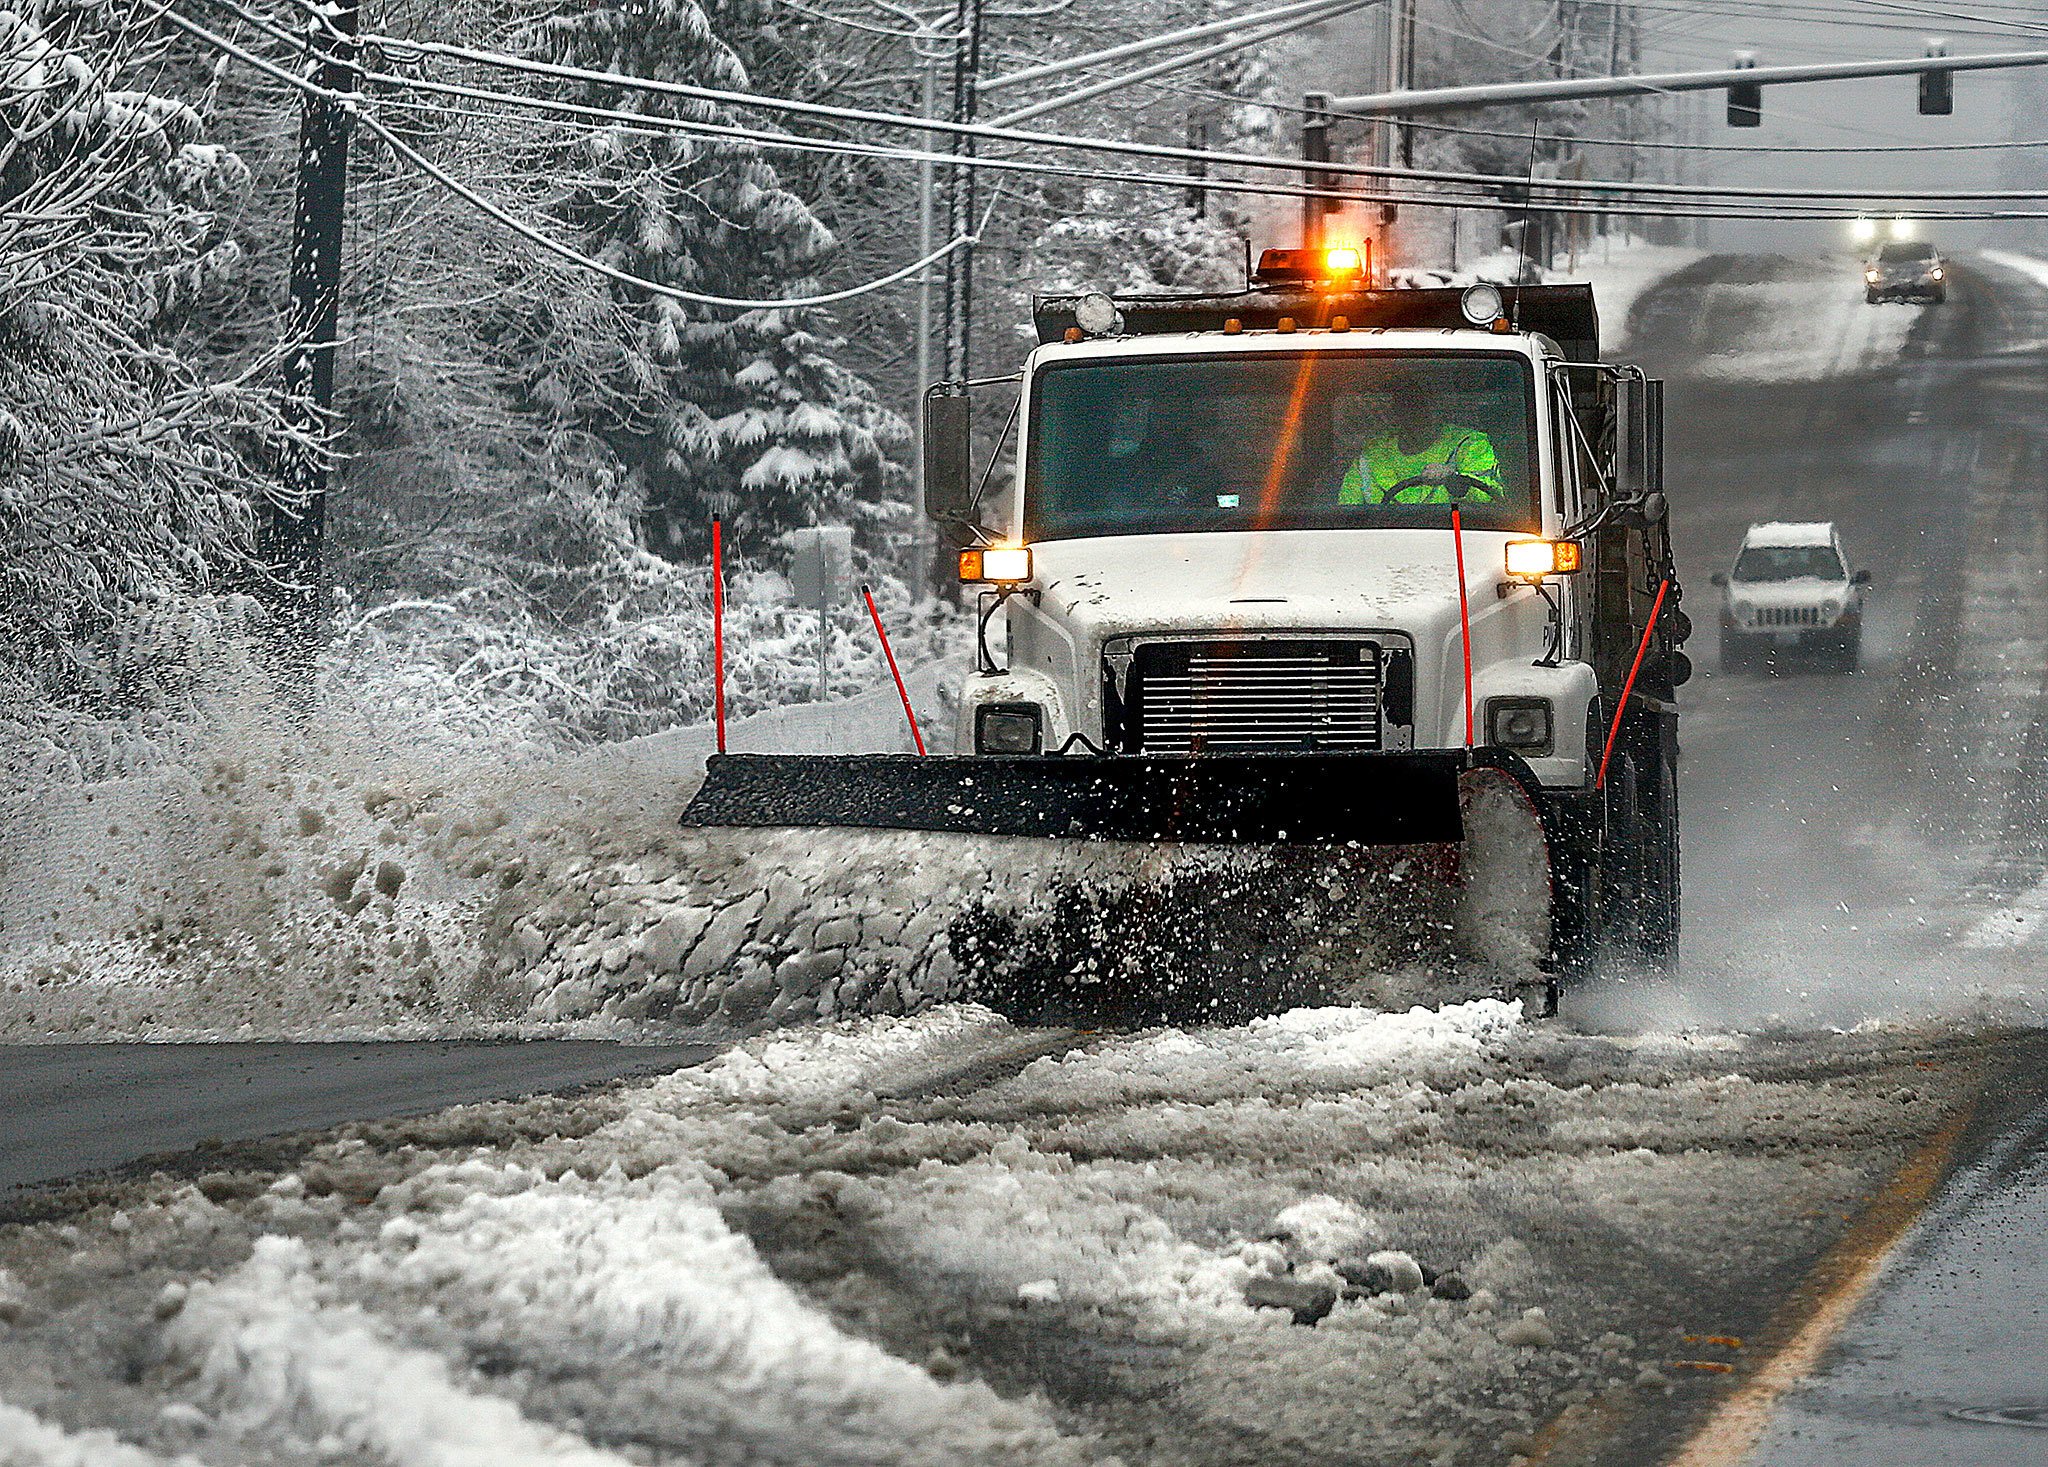 Snow plows, including this one on 20th Street SE between Everett and Lake Stevens, were clearing snow and slush from as many streets as possible before temperatures dropped again Monday night. (Dan Bates / The Herald)
